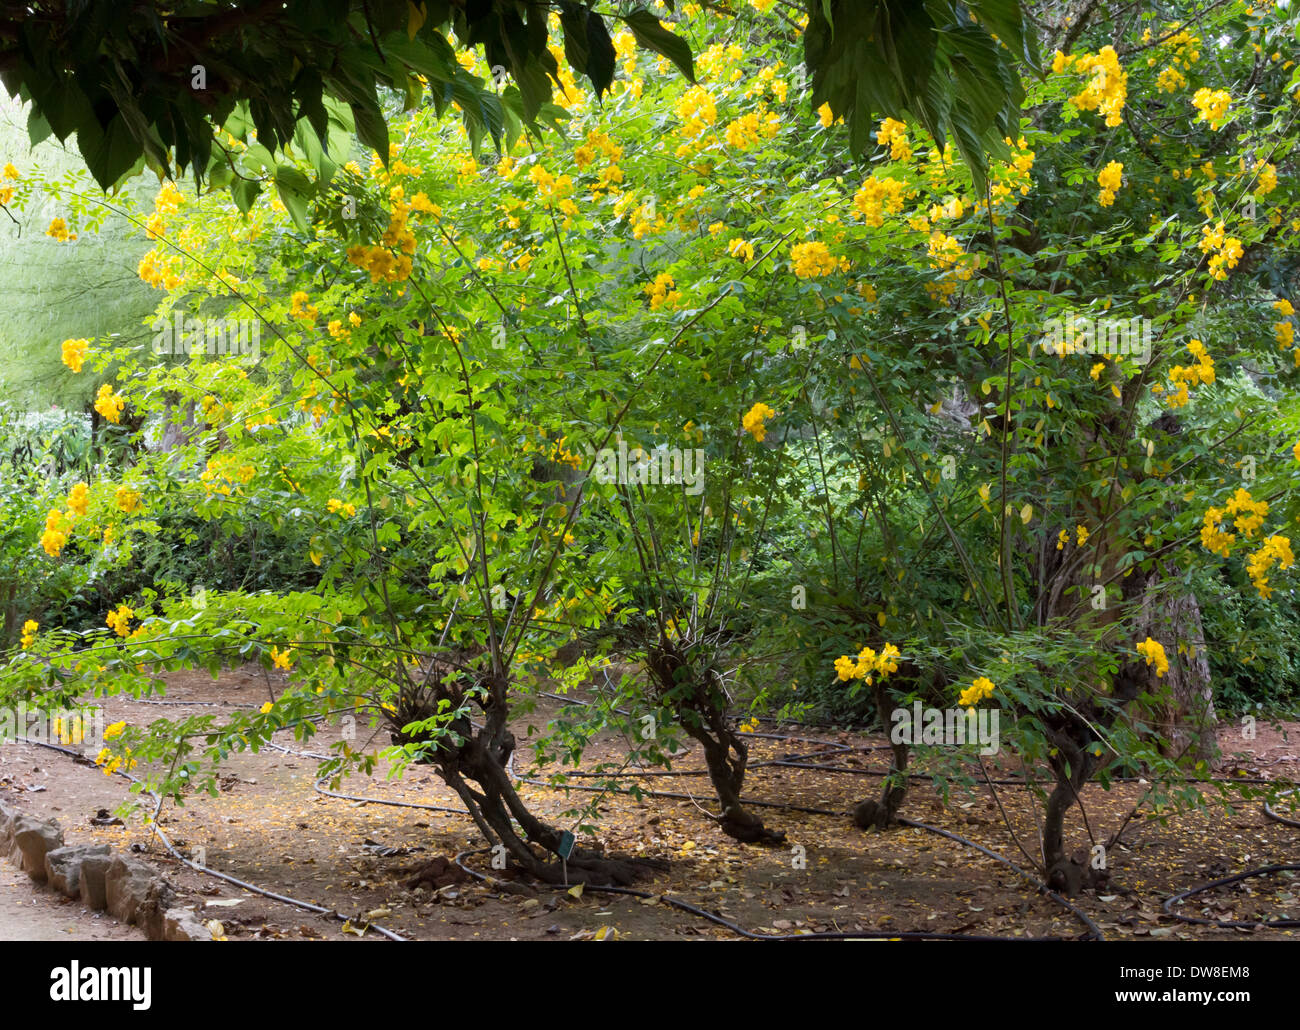 Blossoming Cassia Tree. Cassia tree in bloom, Mallorca, Balearic islands, Spain in October. Stock Photo